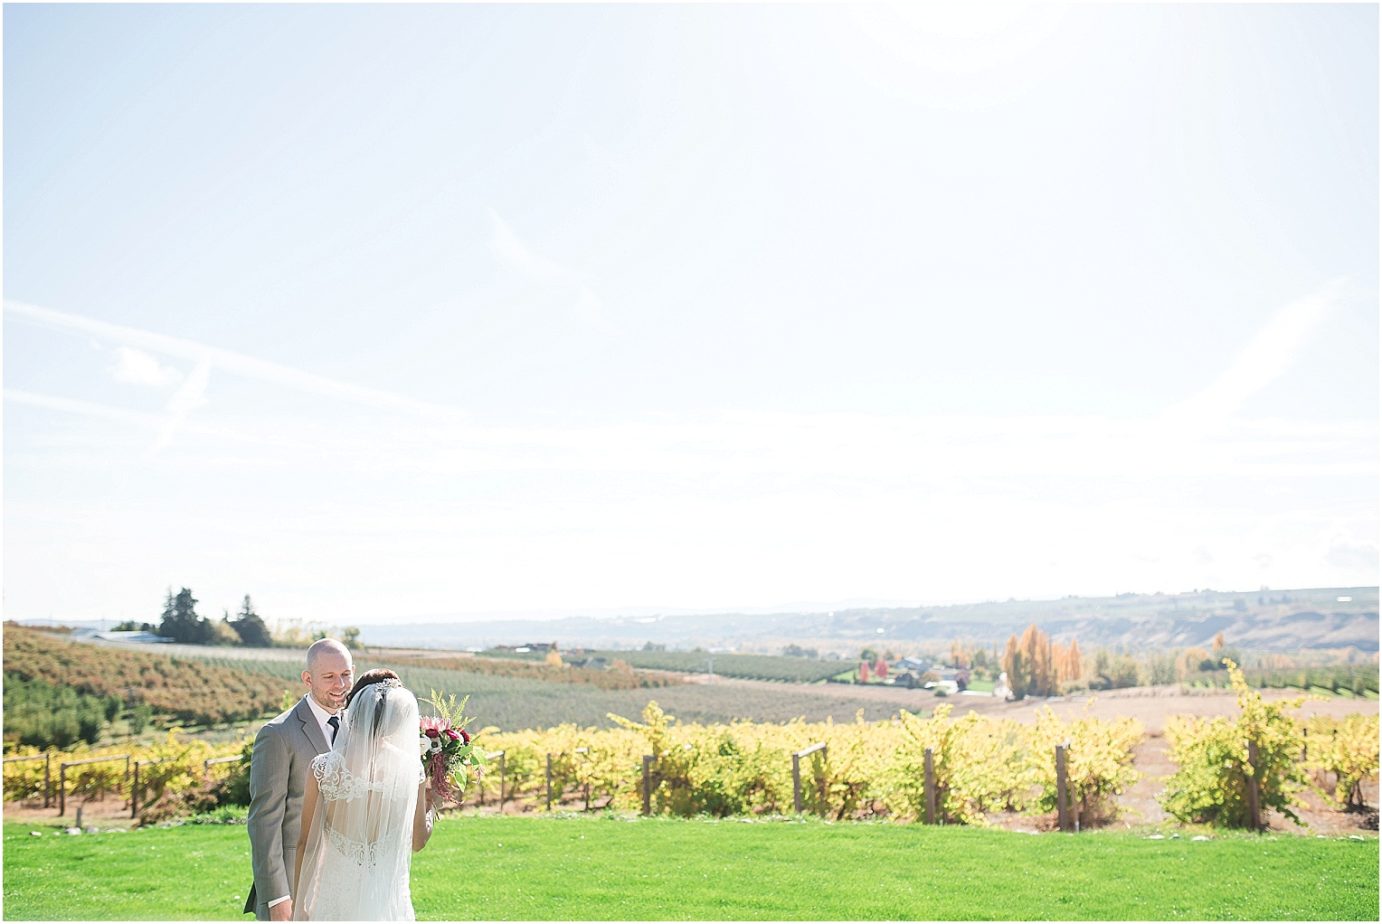 Fontaine Estates Winery Wedding Bride and groom first look photo